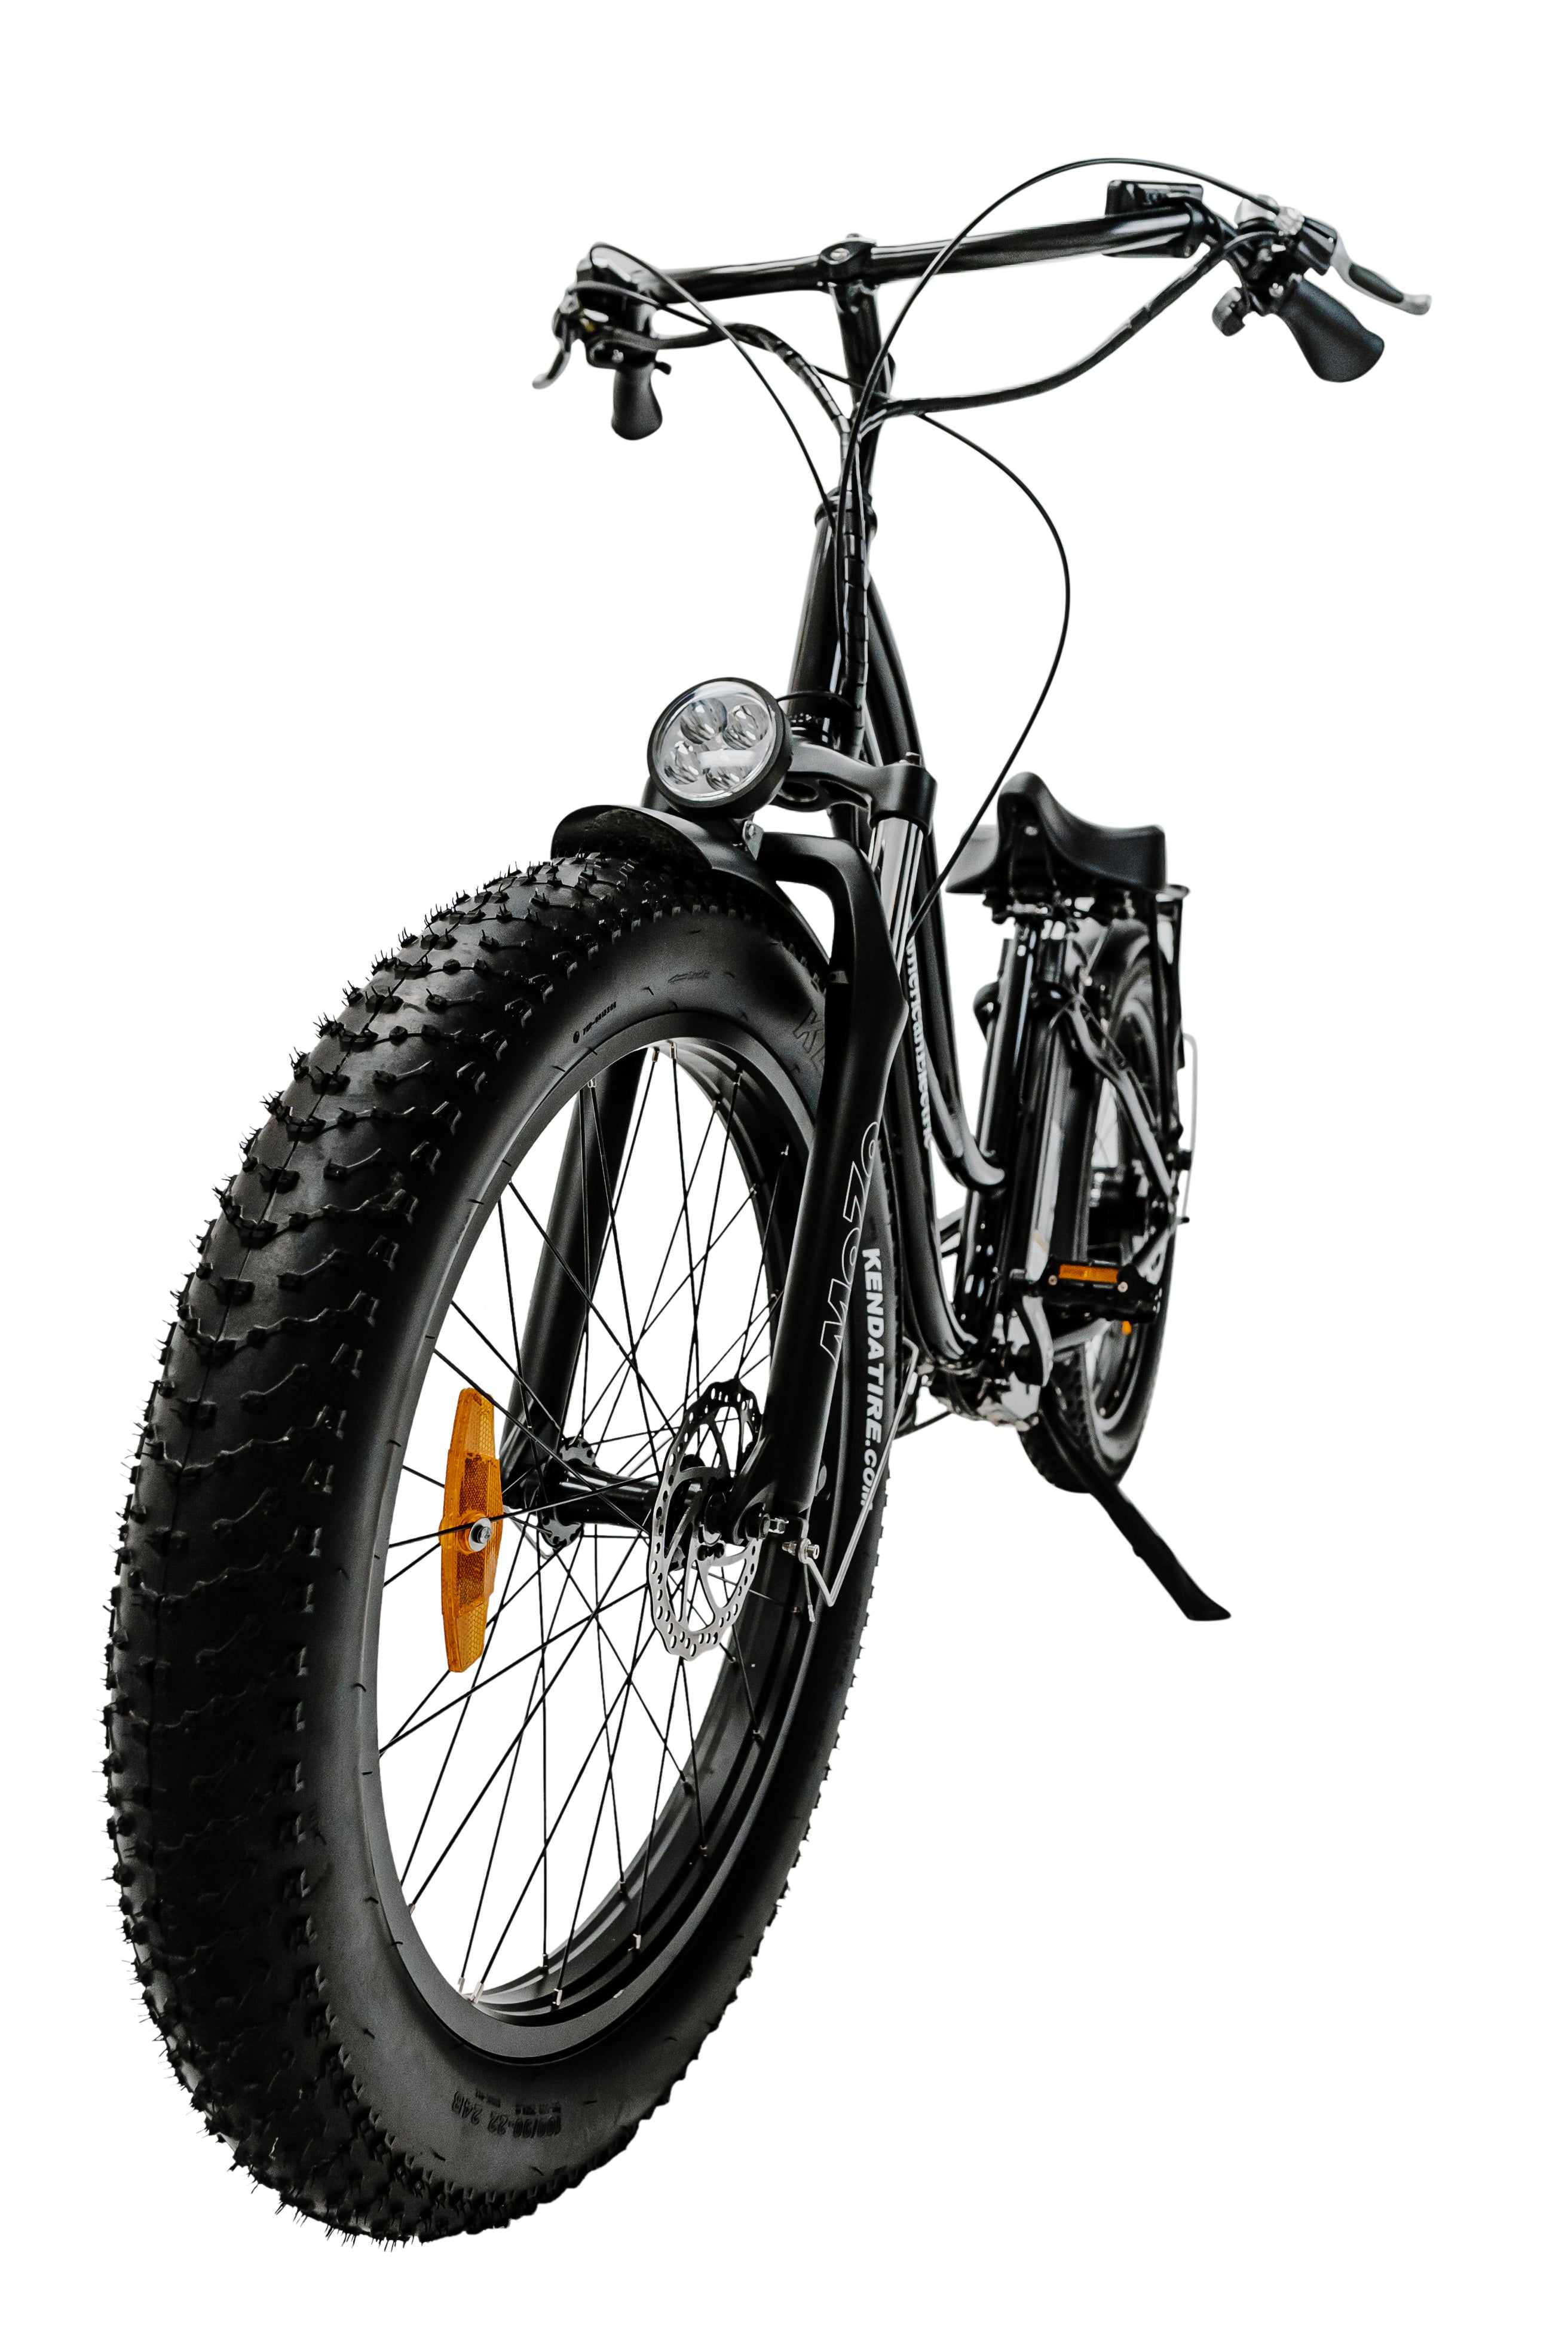 AmericanElectric Steller Step-Through 750w Electric Cruiser Bicycle